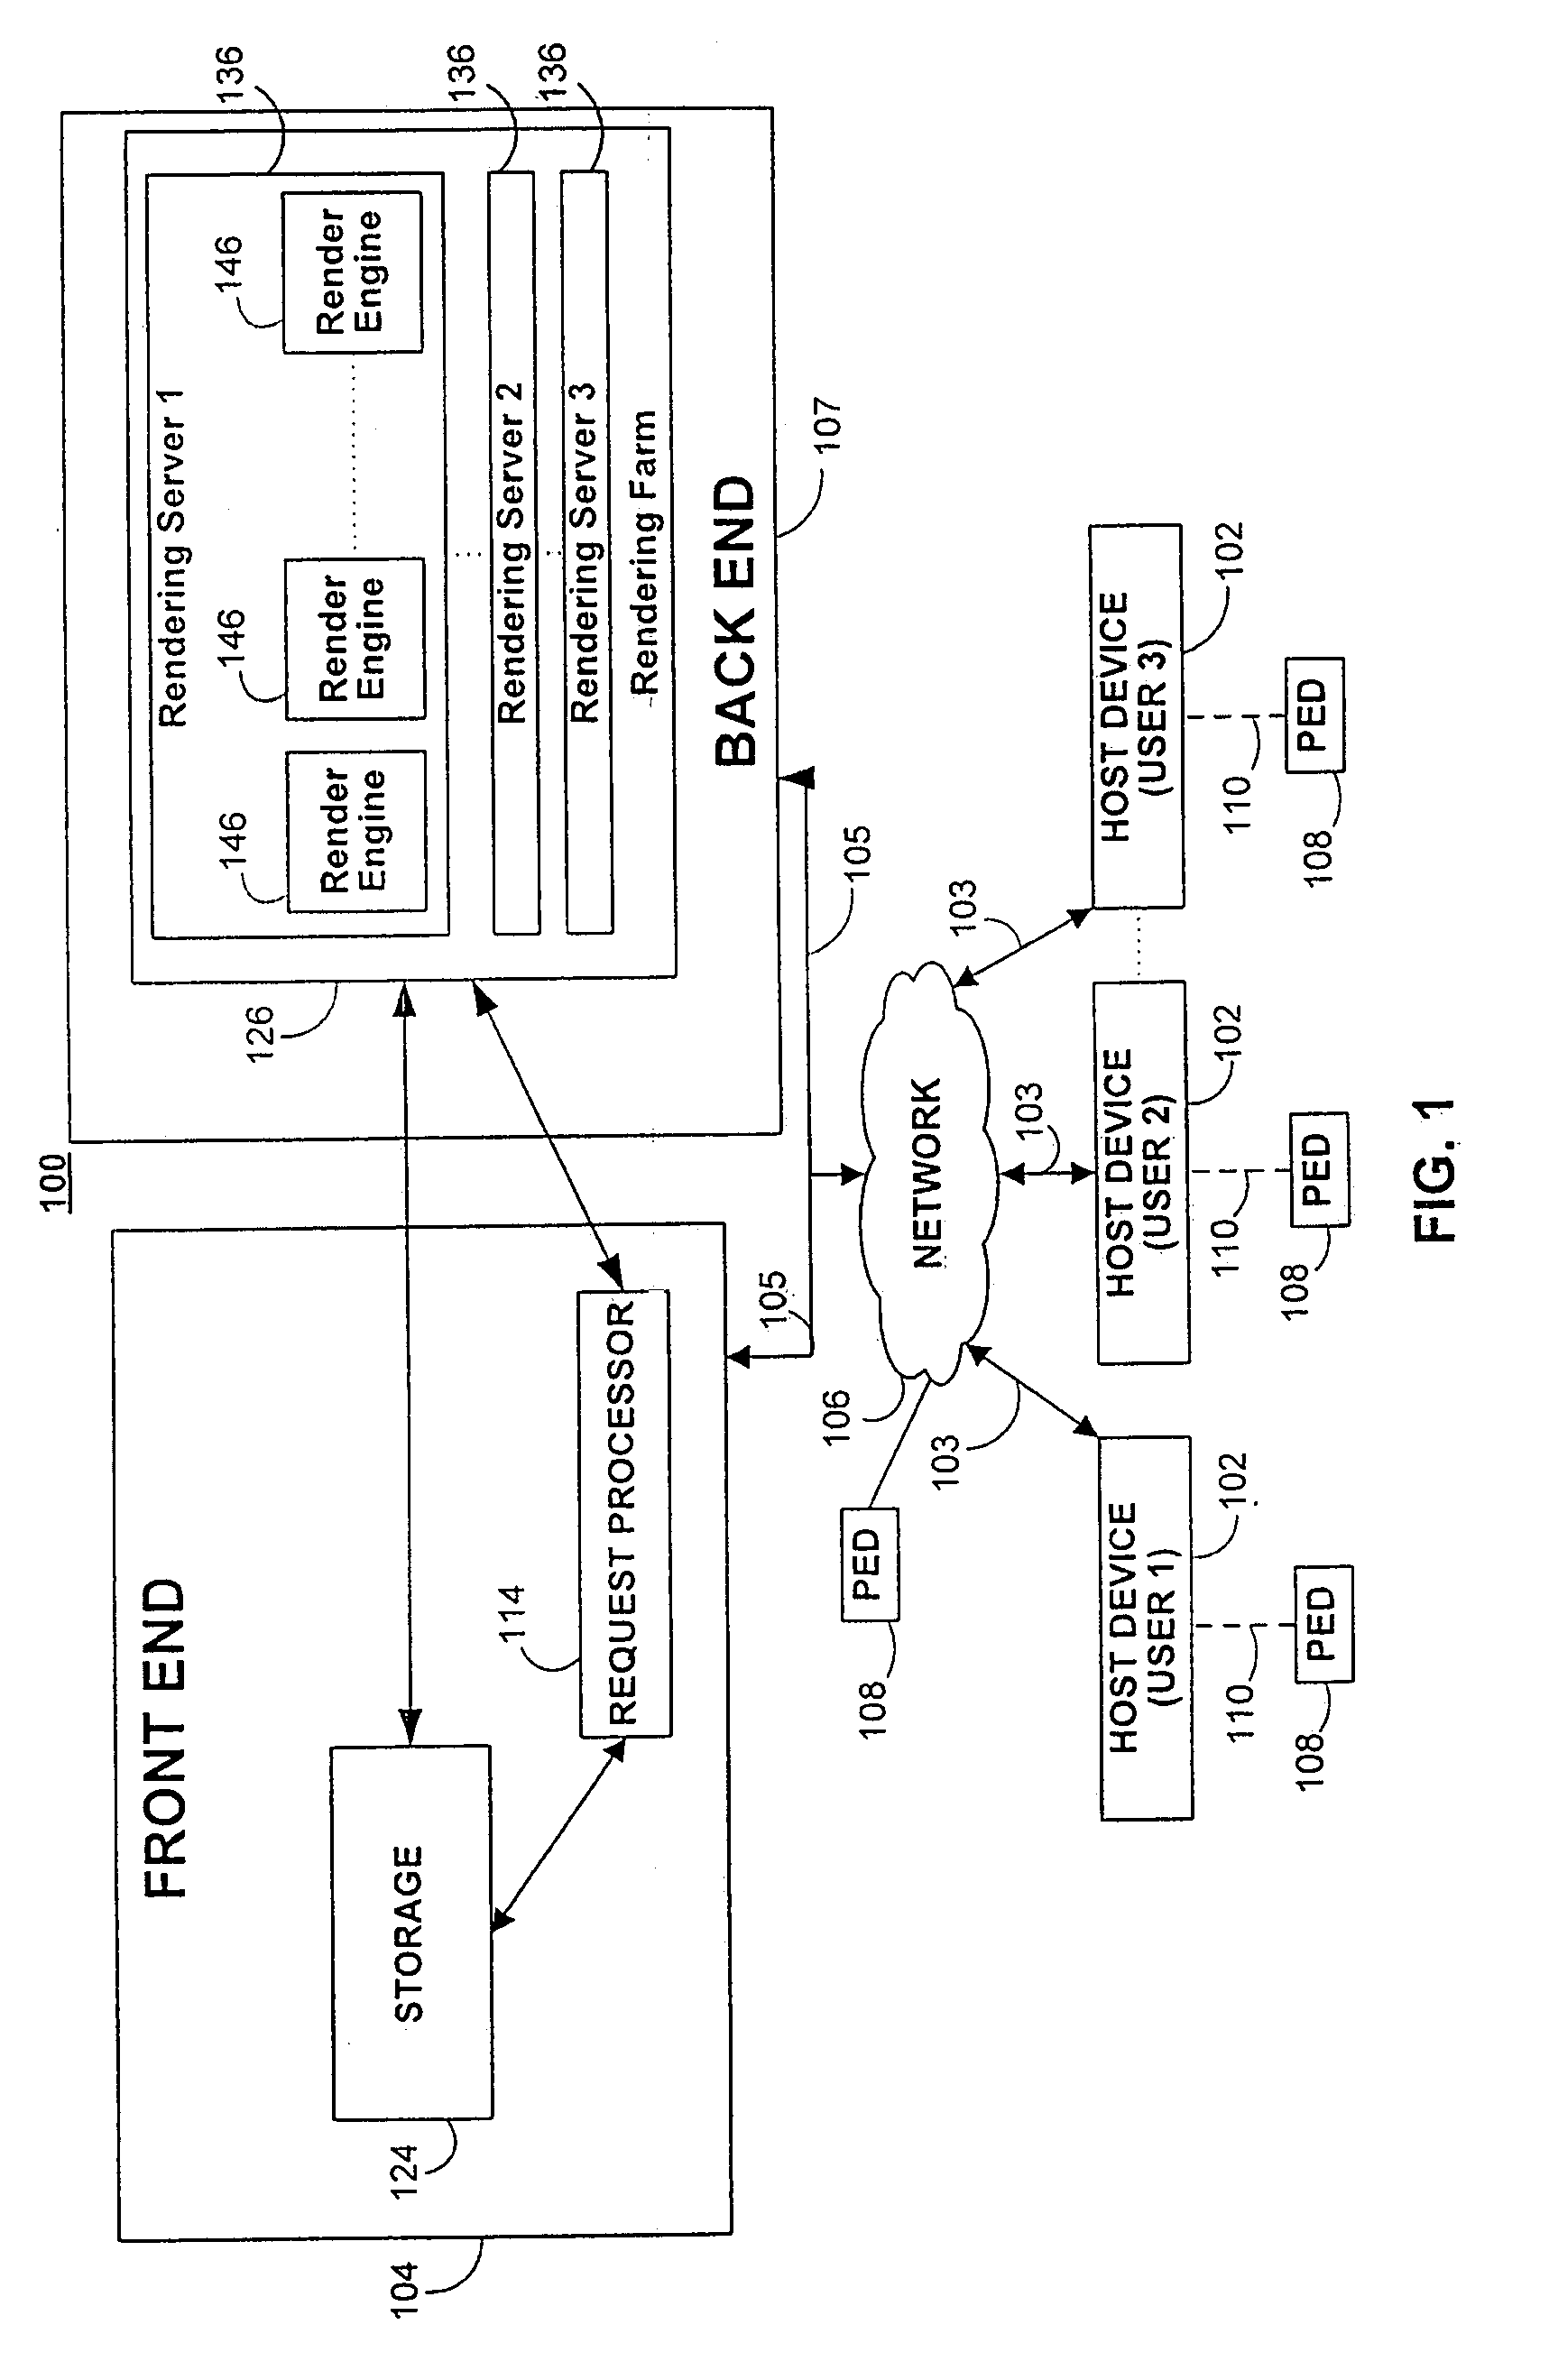 Systems and methods for mapping phonemes for text to speech synthesis